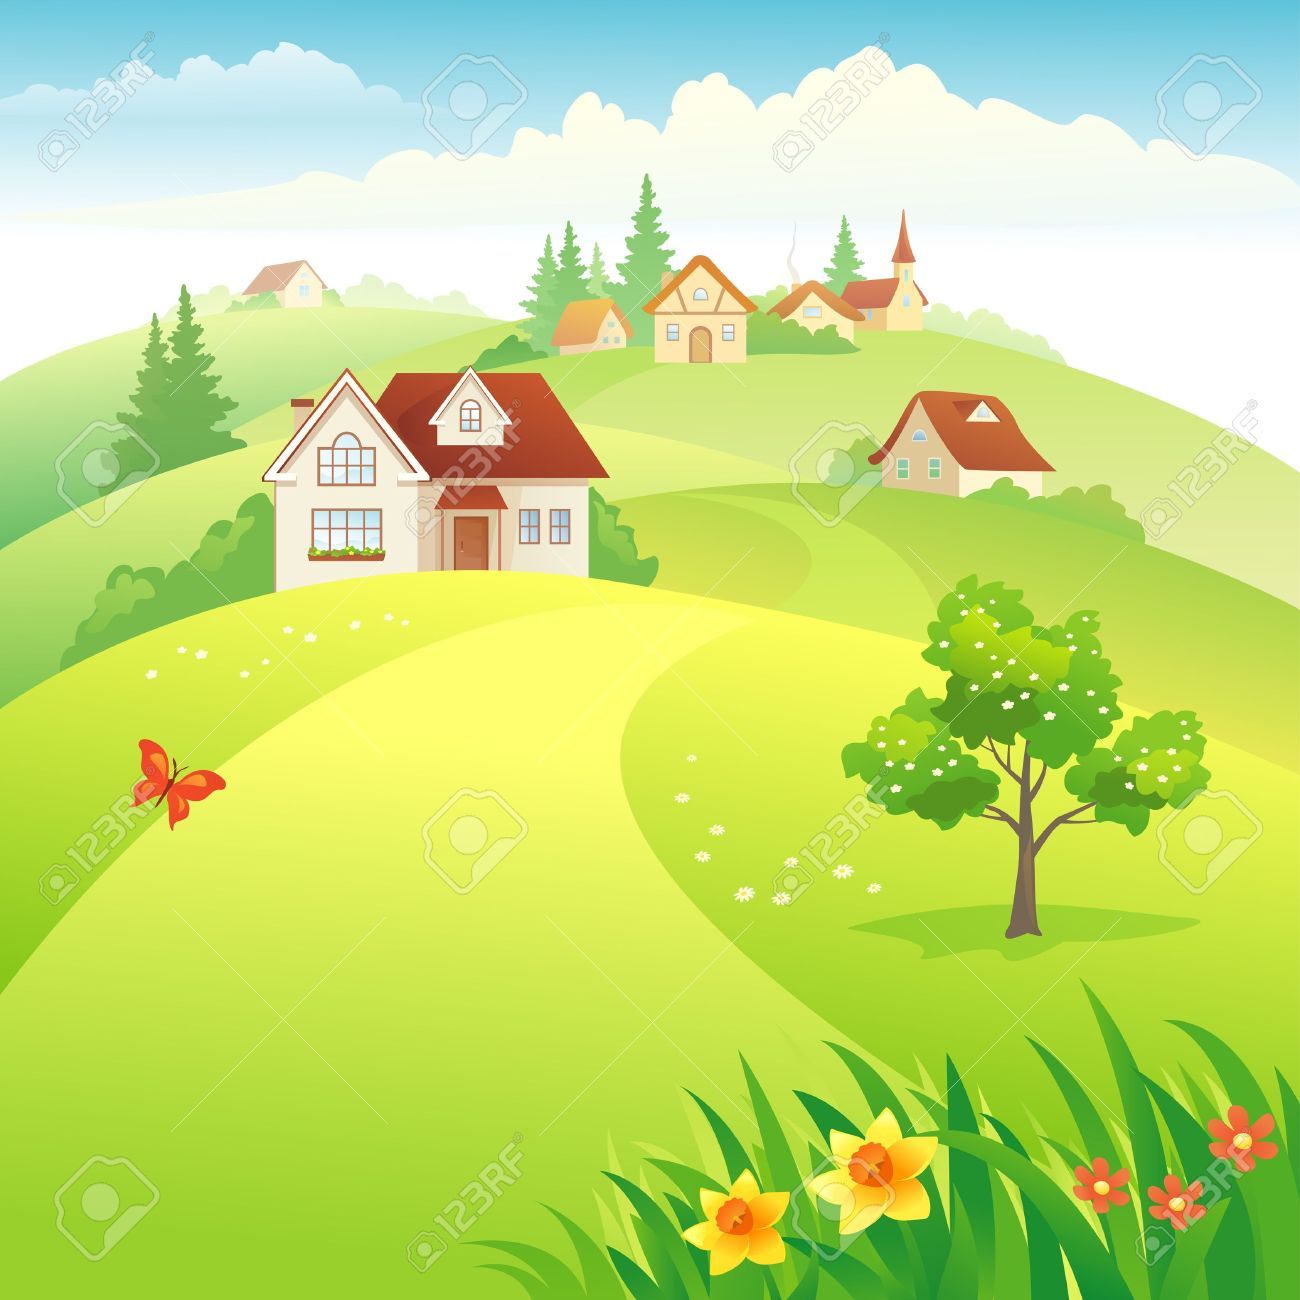 Clipart village clipart images gallery for free download